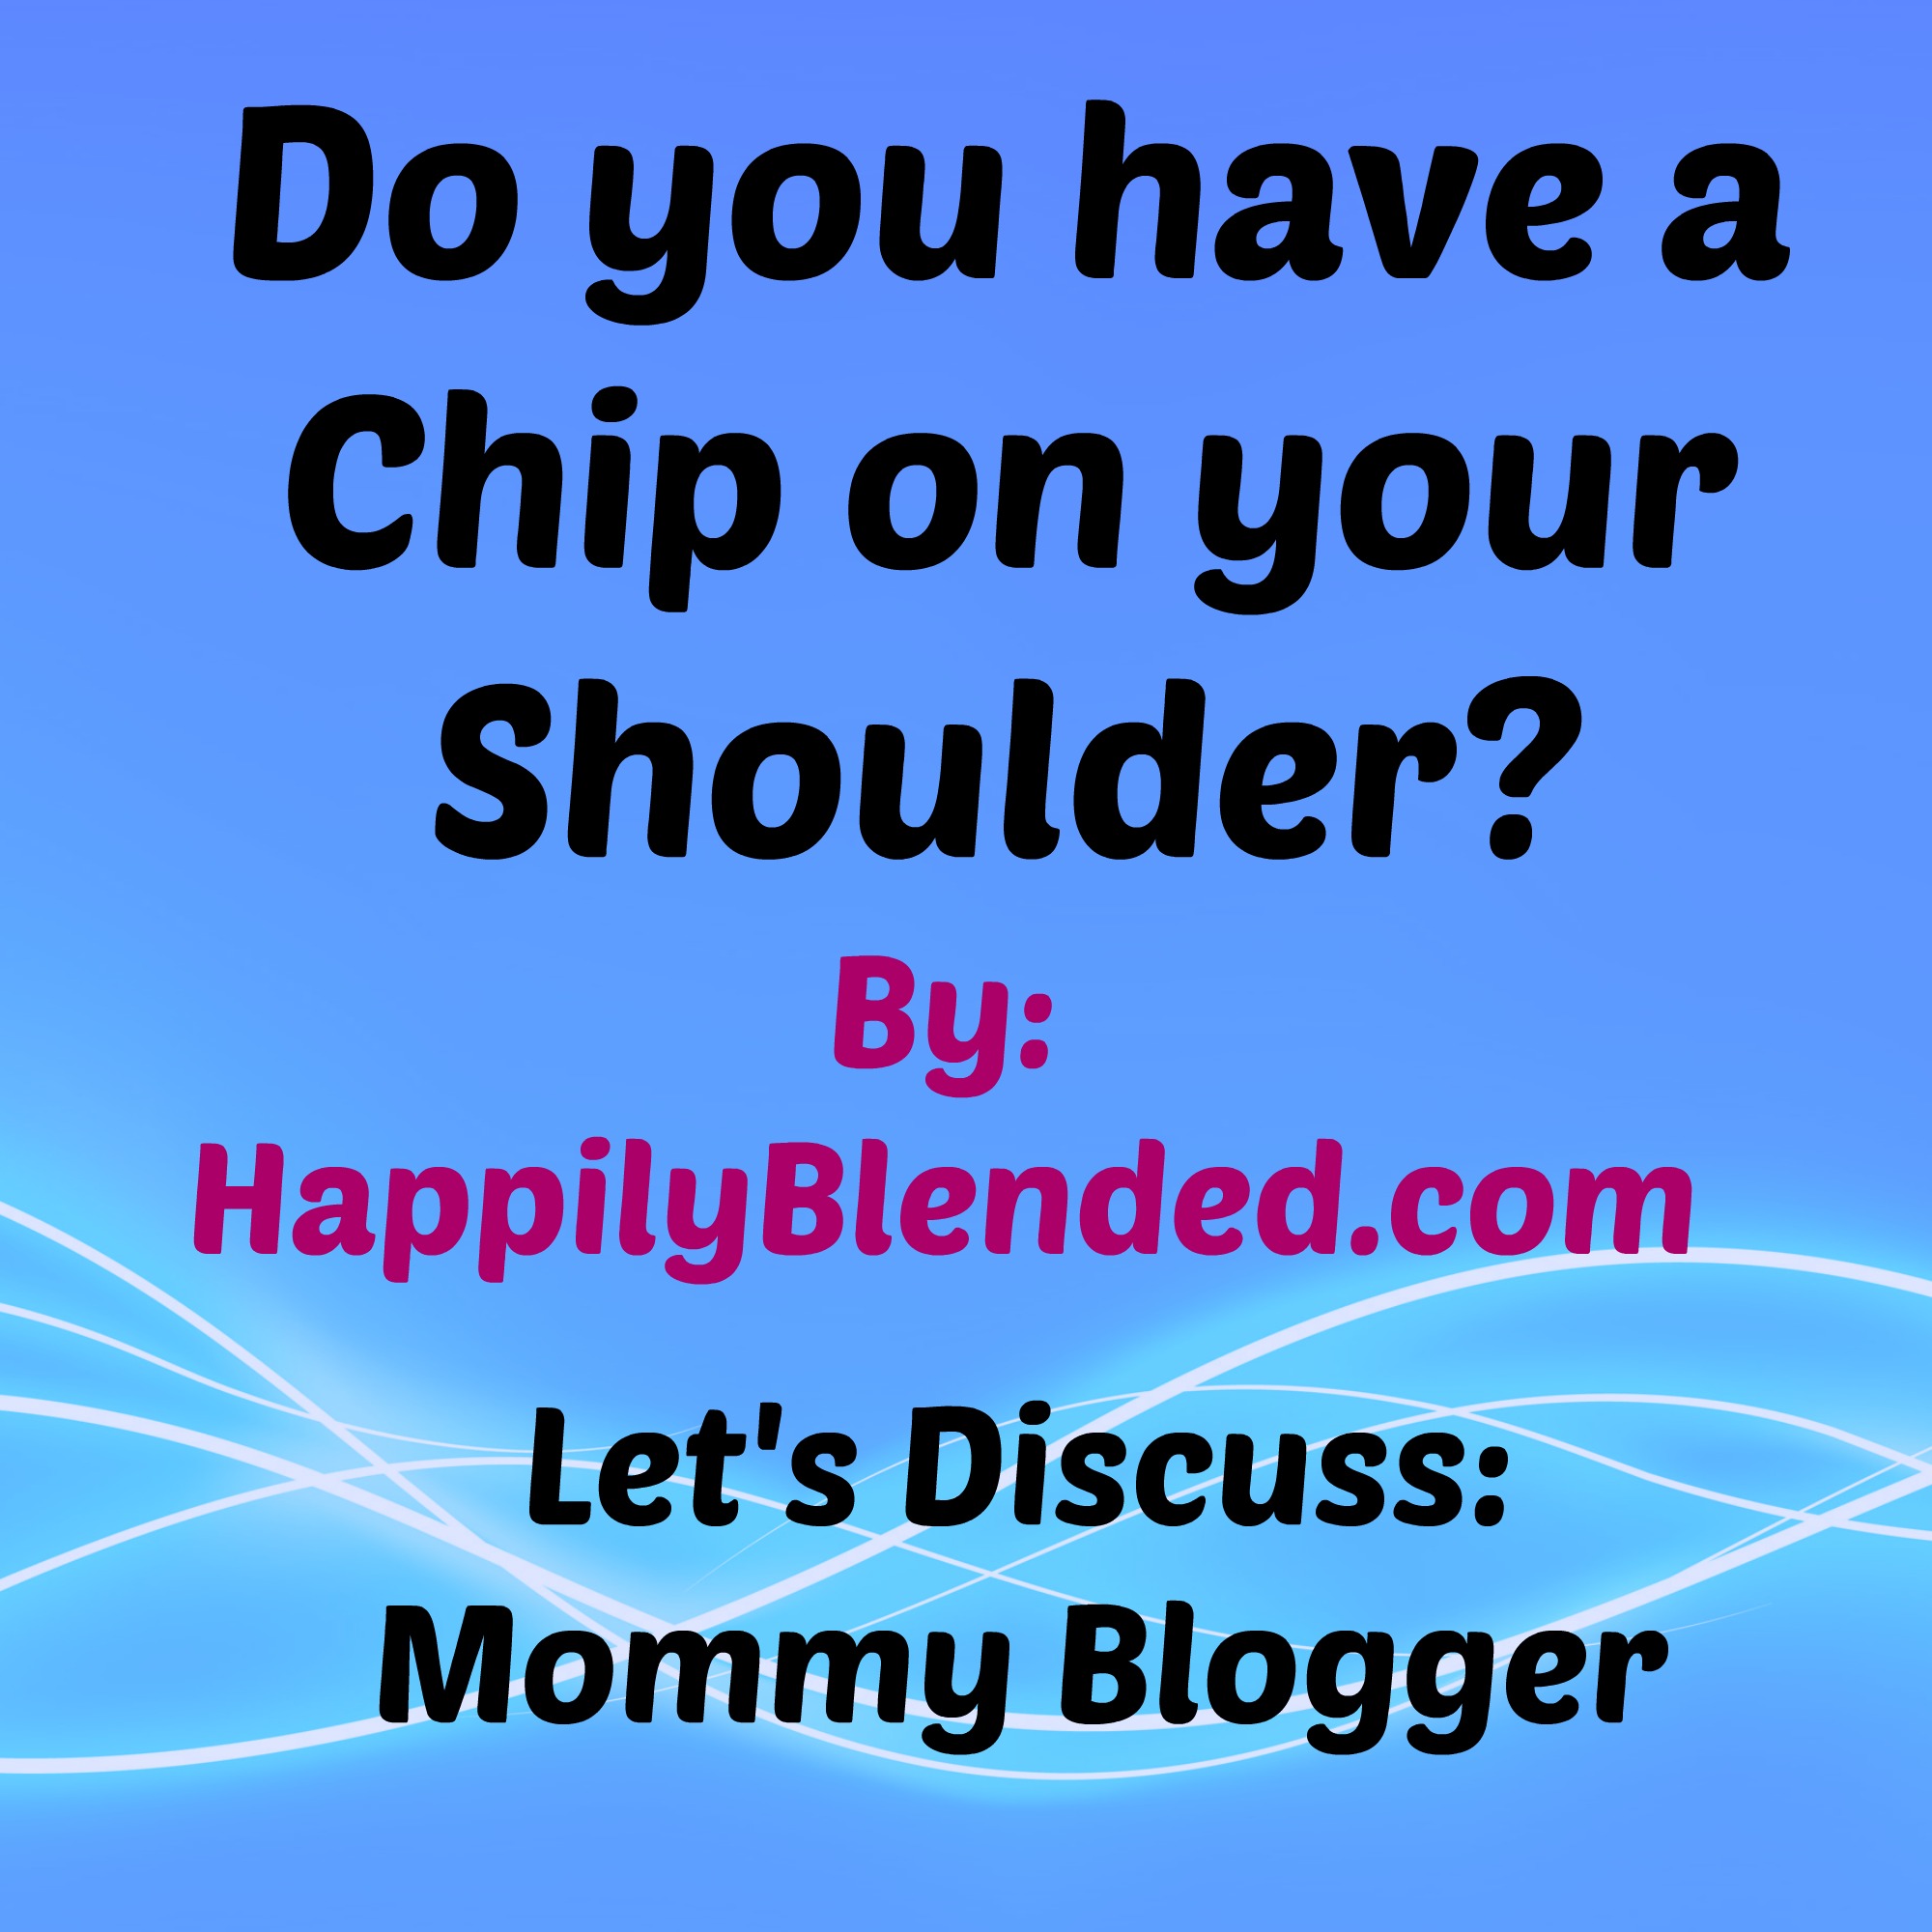 Do you have a Chip on your Shoulder?